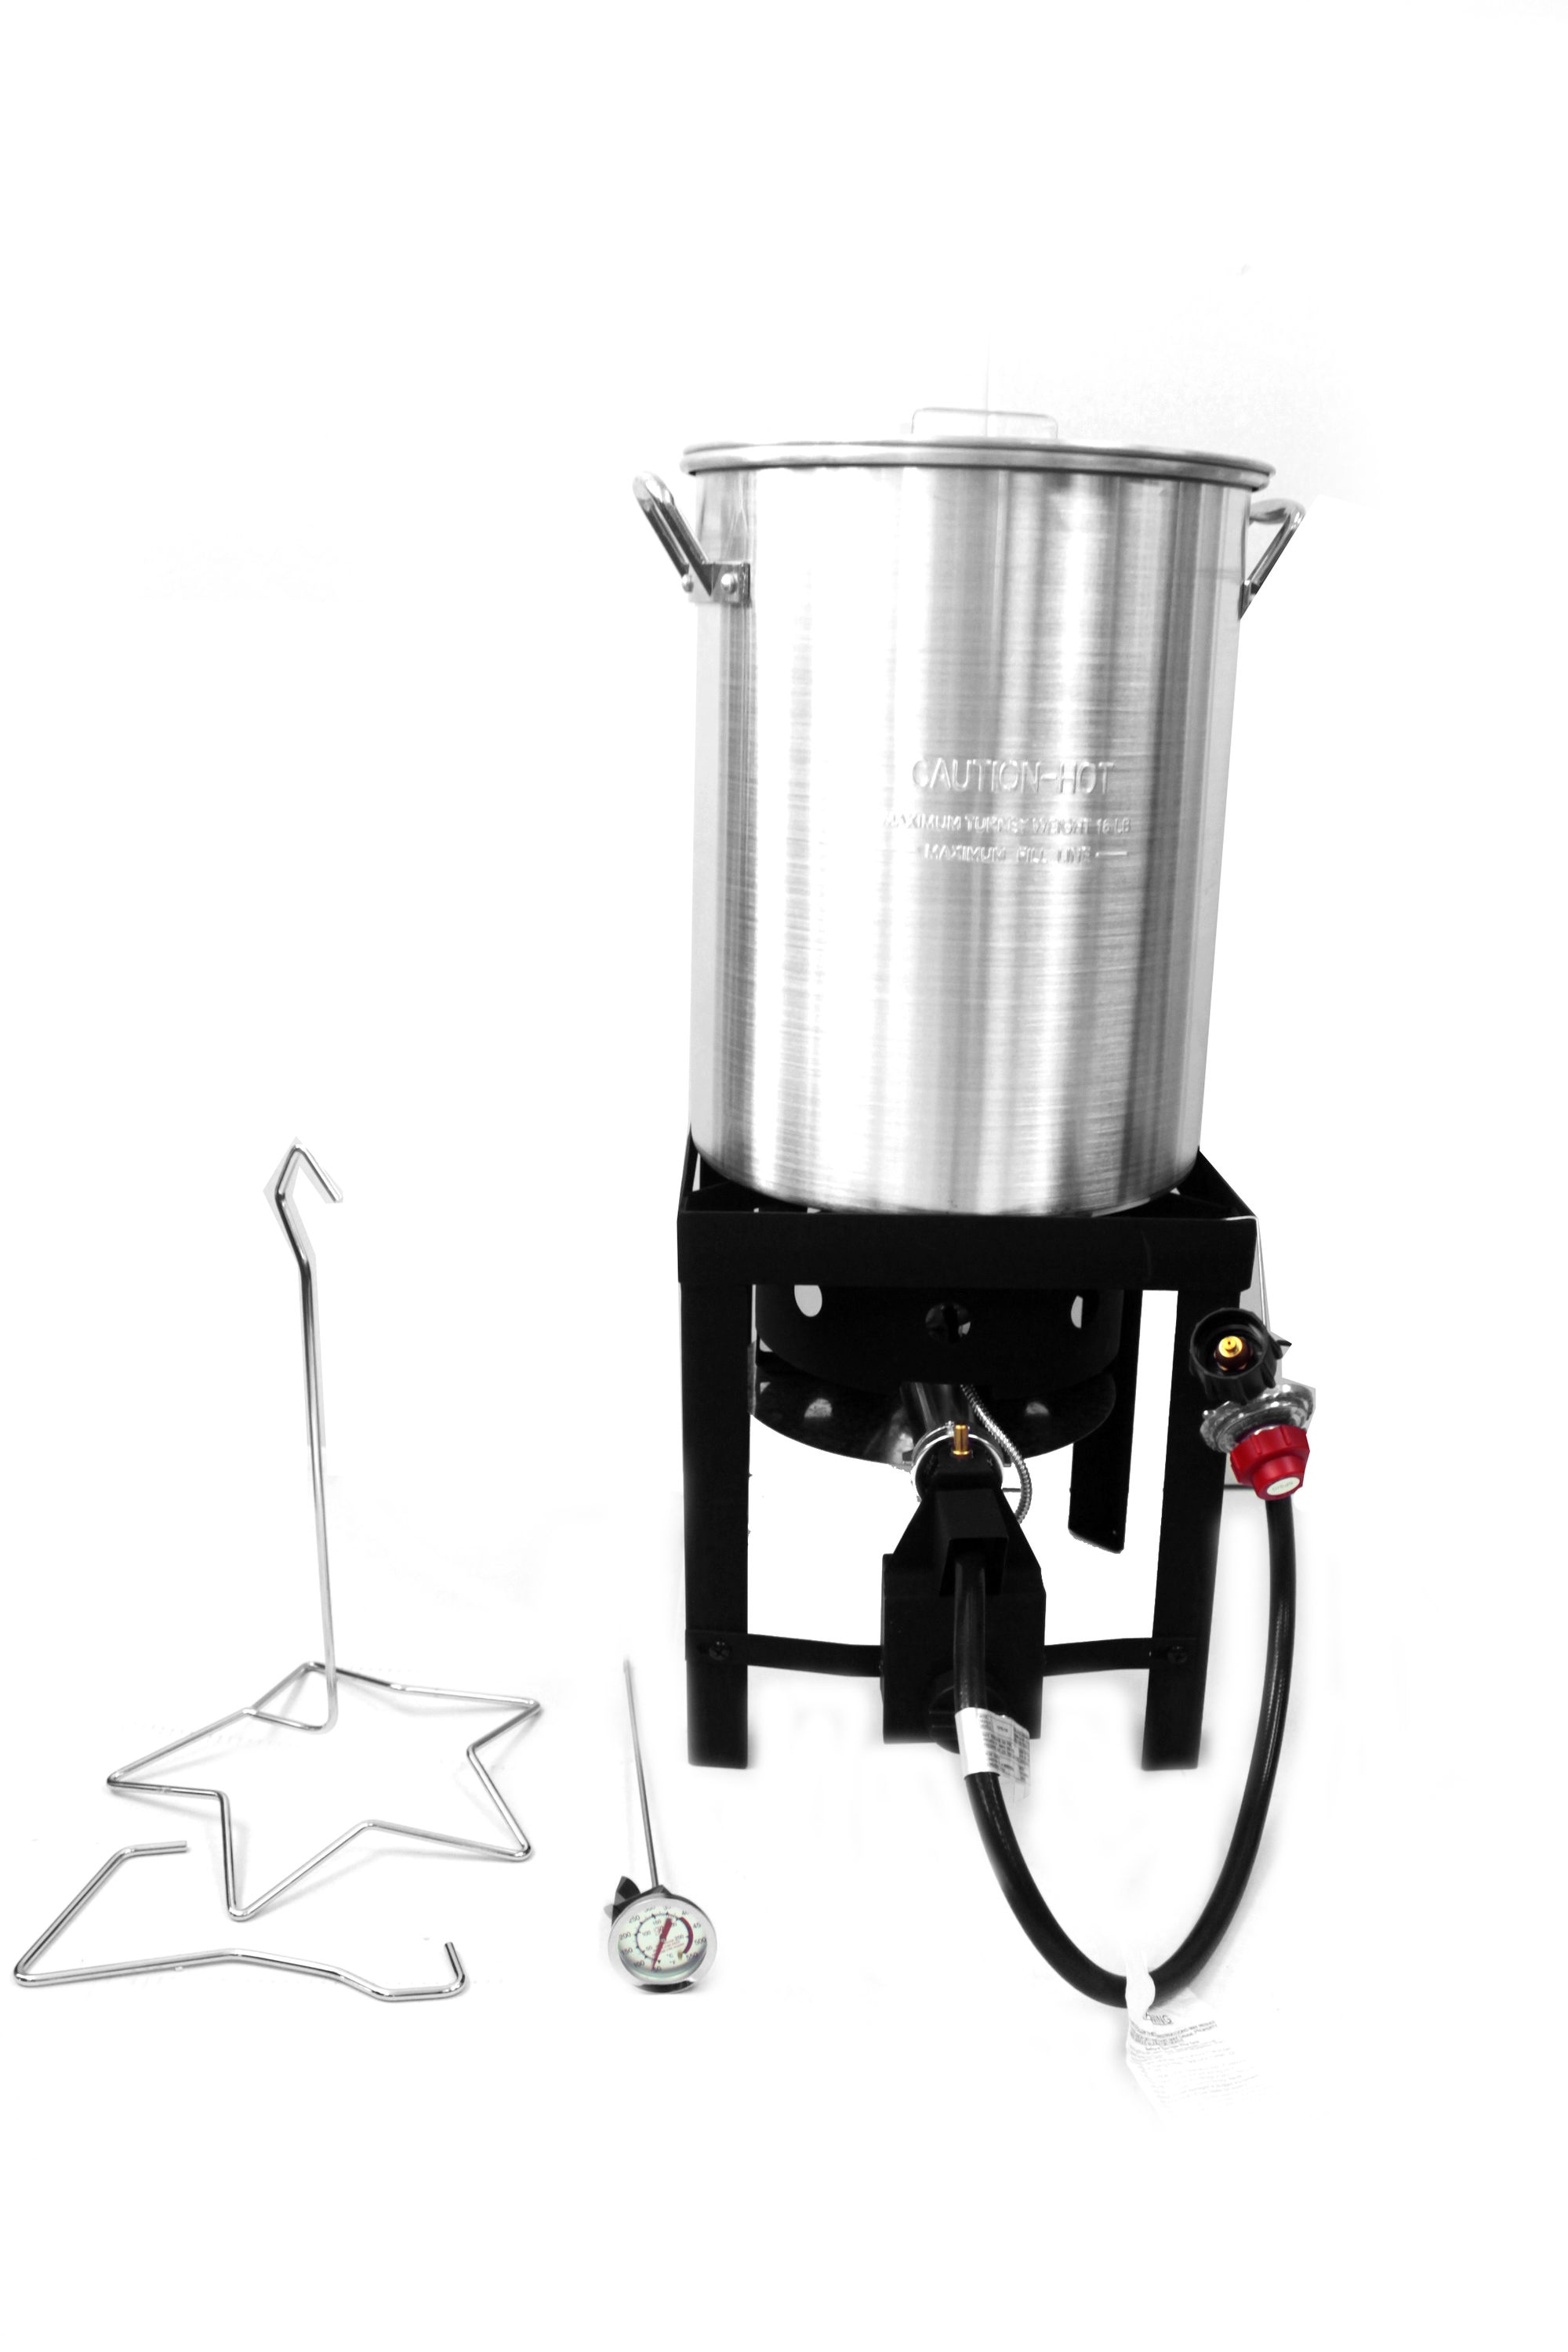 You Can Get This Turkey Fryer Kit for 46% Off, Just in Time for Thanksgiving